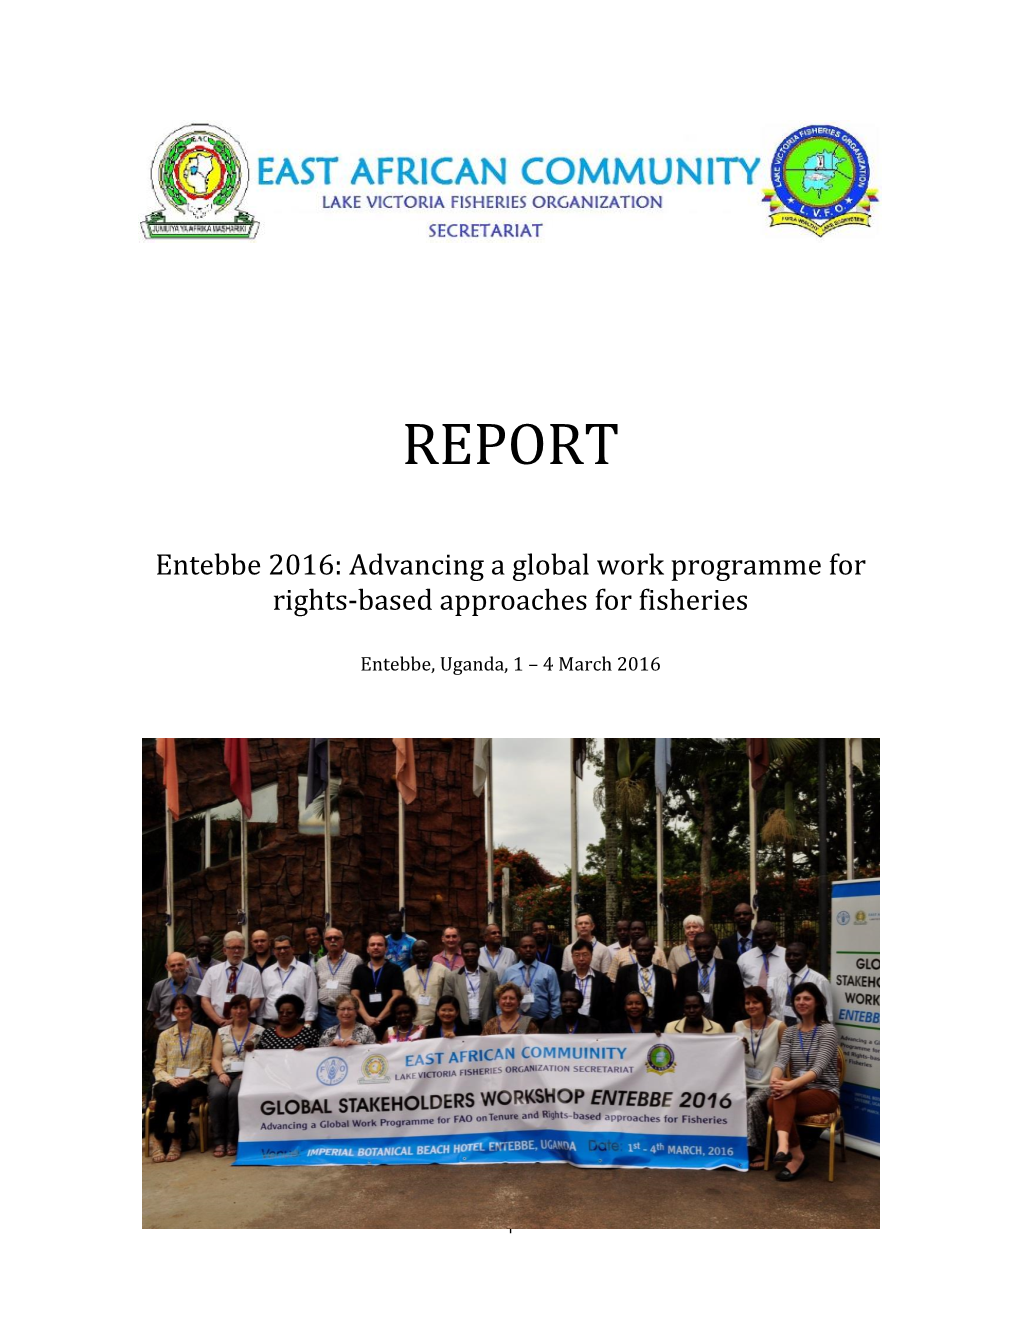 Entebbe 2016: Advancing a Global Work Programme for Rights-Based Approaches for Fisheries